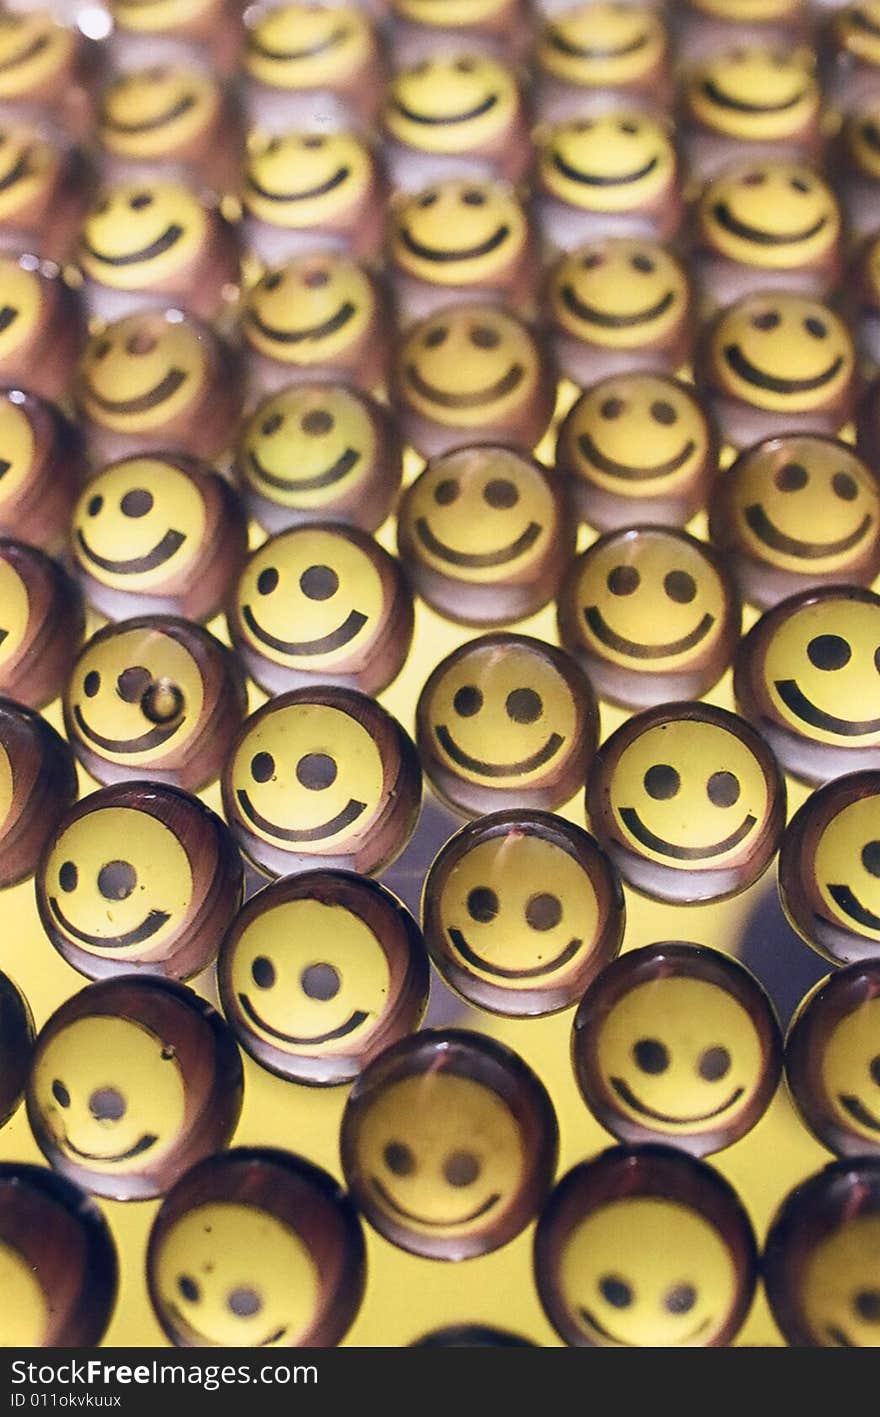 Photo of smiley faces in glass marbles.